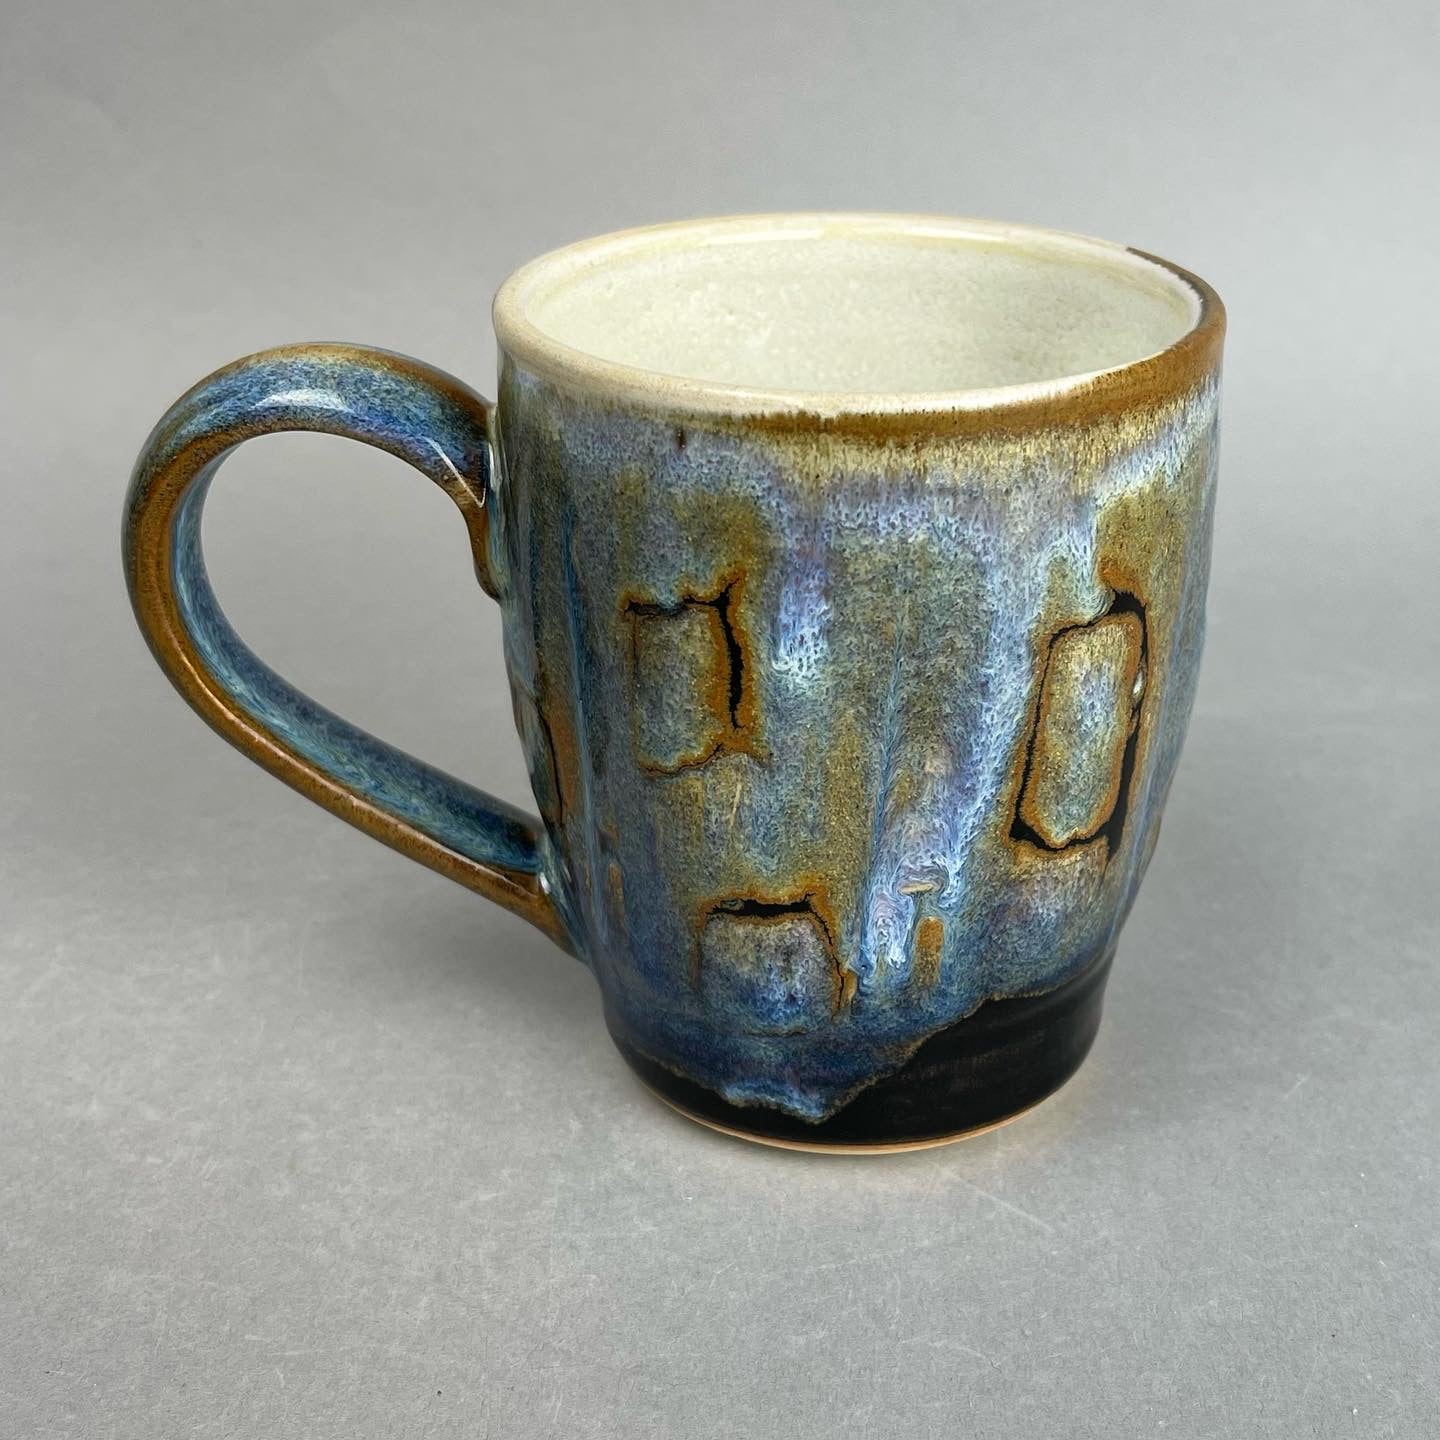 Beyond the Basics: Glazing Workshop with Lou Ann Smith - 9/16, 9/17 and 9/24